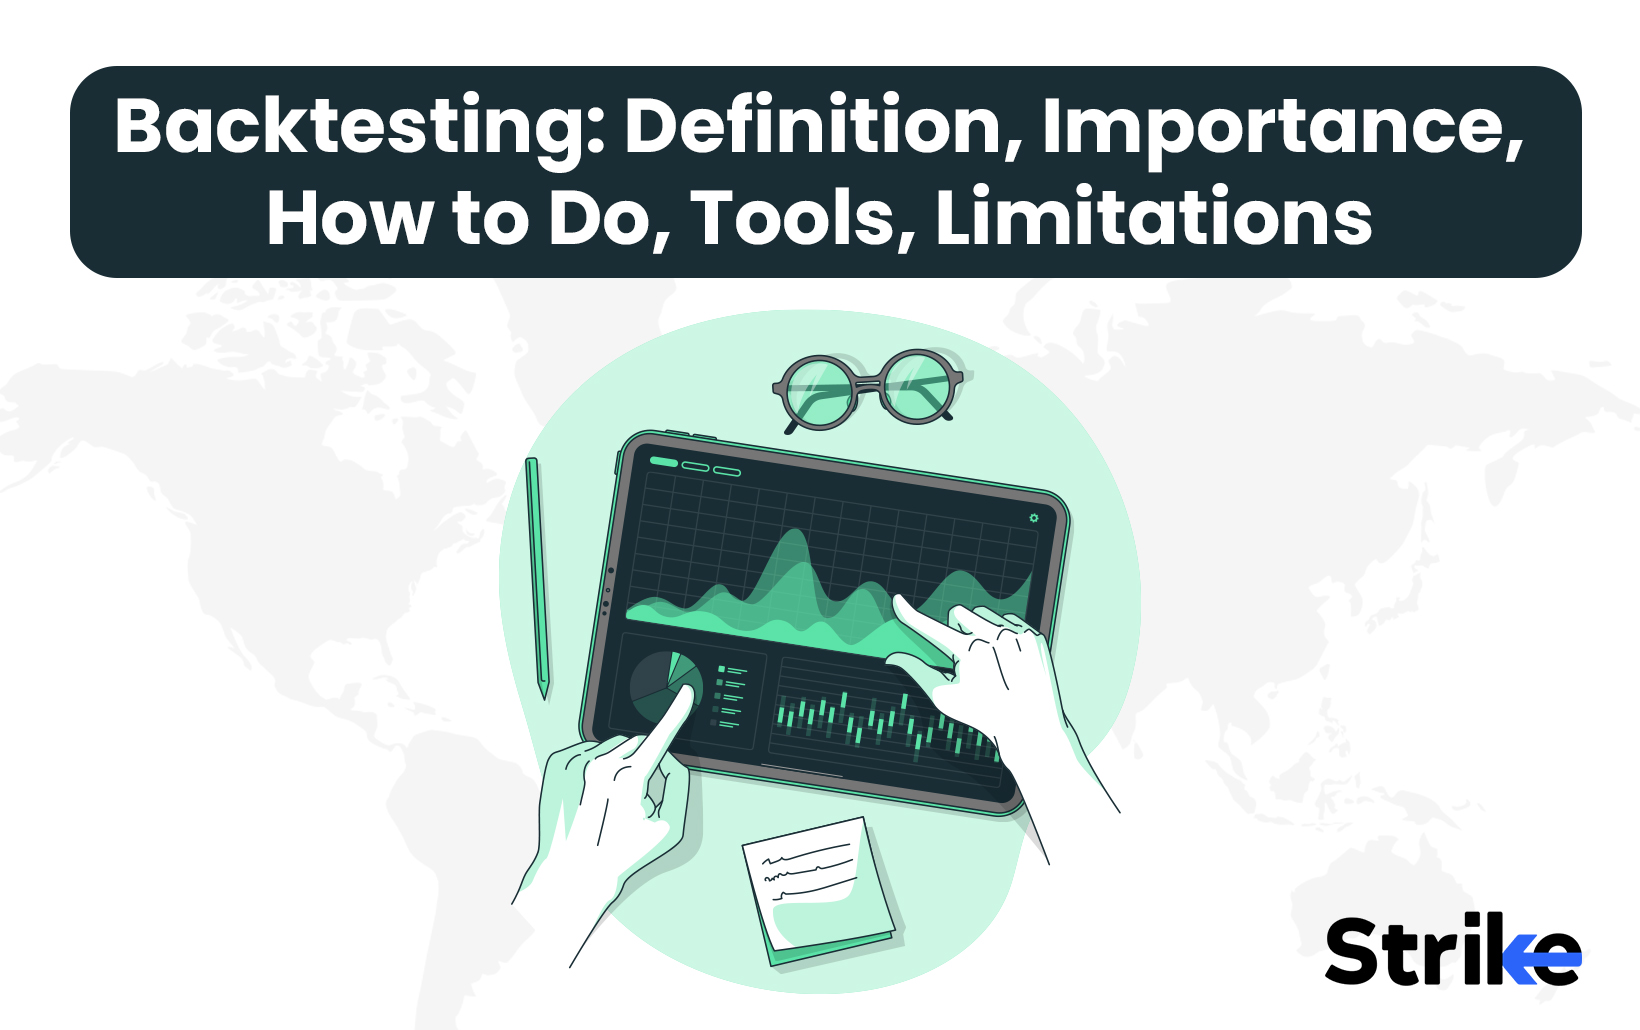 Backtesting: Definition, Importance, How to Do, Tools, Limitations